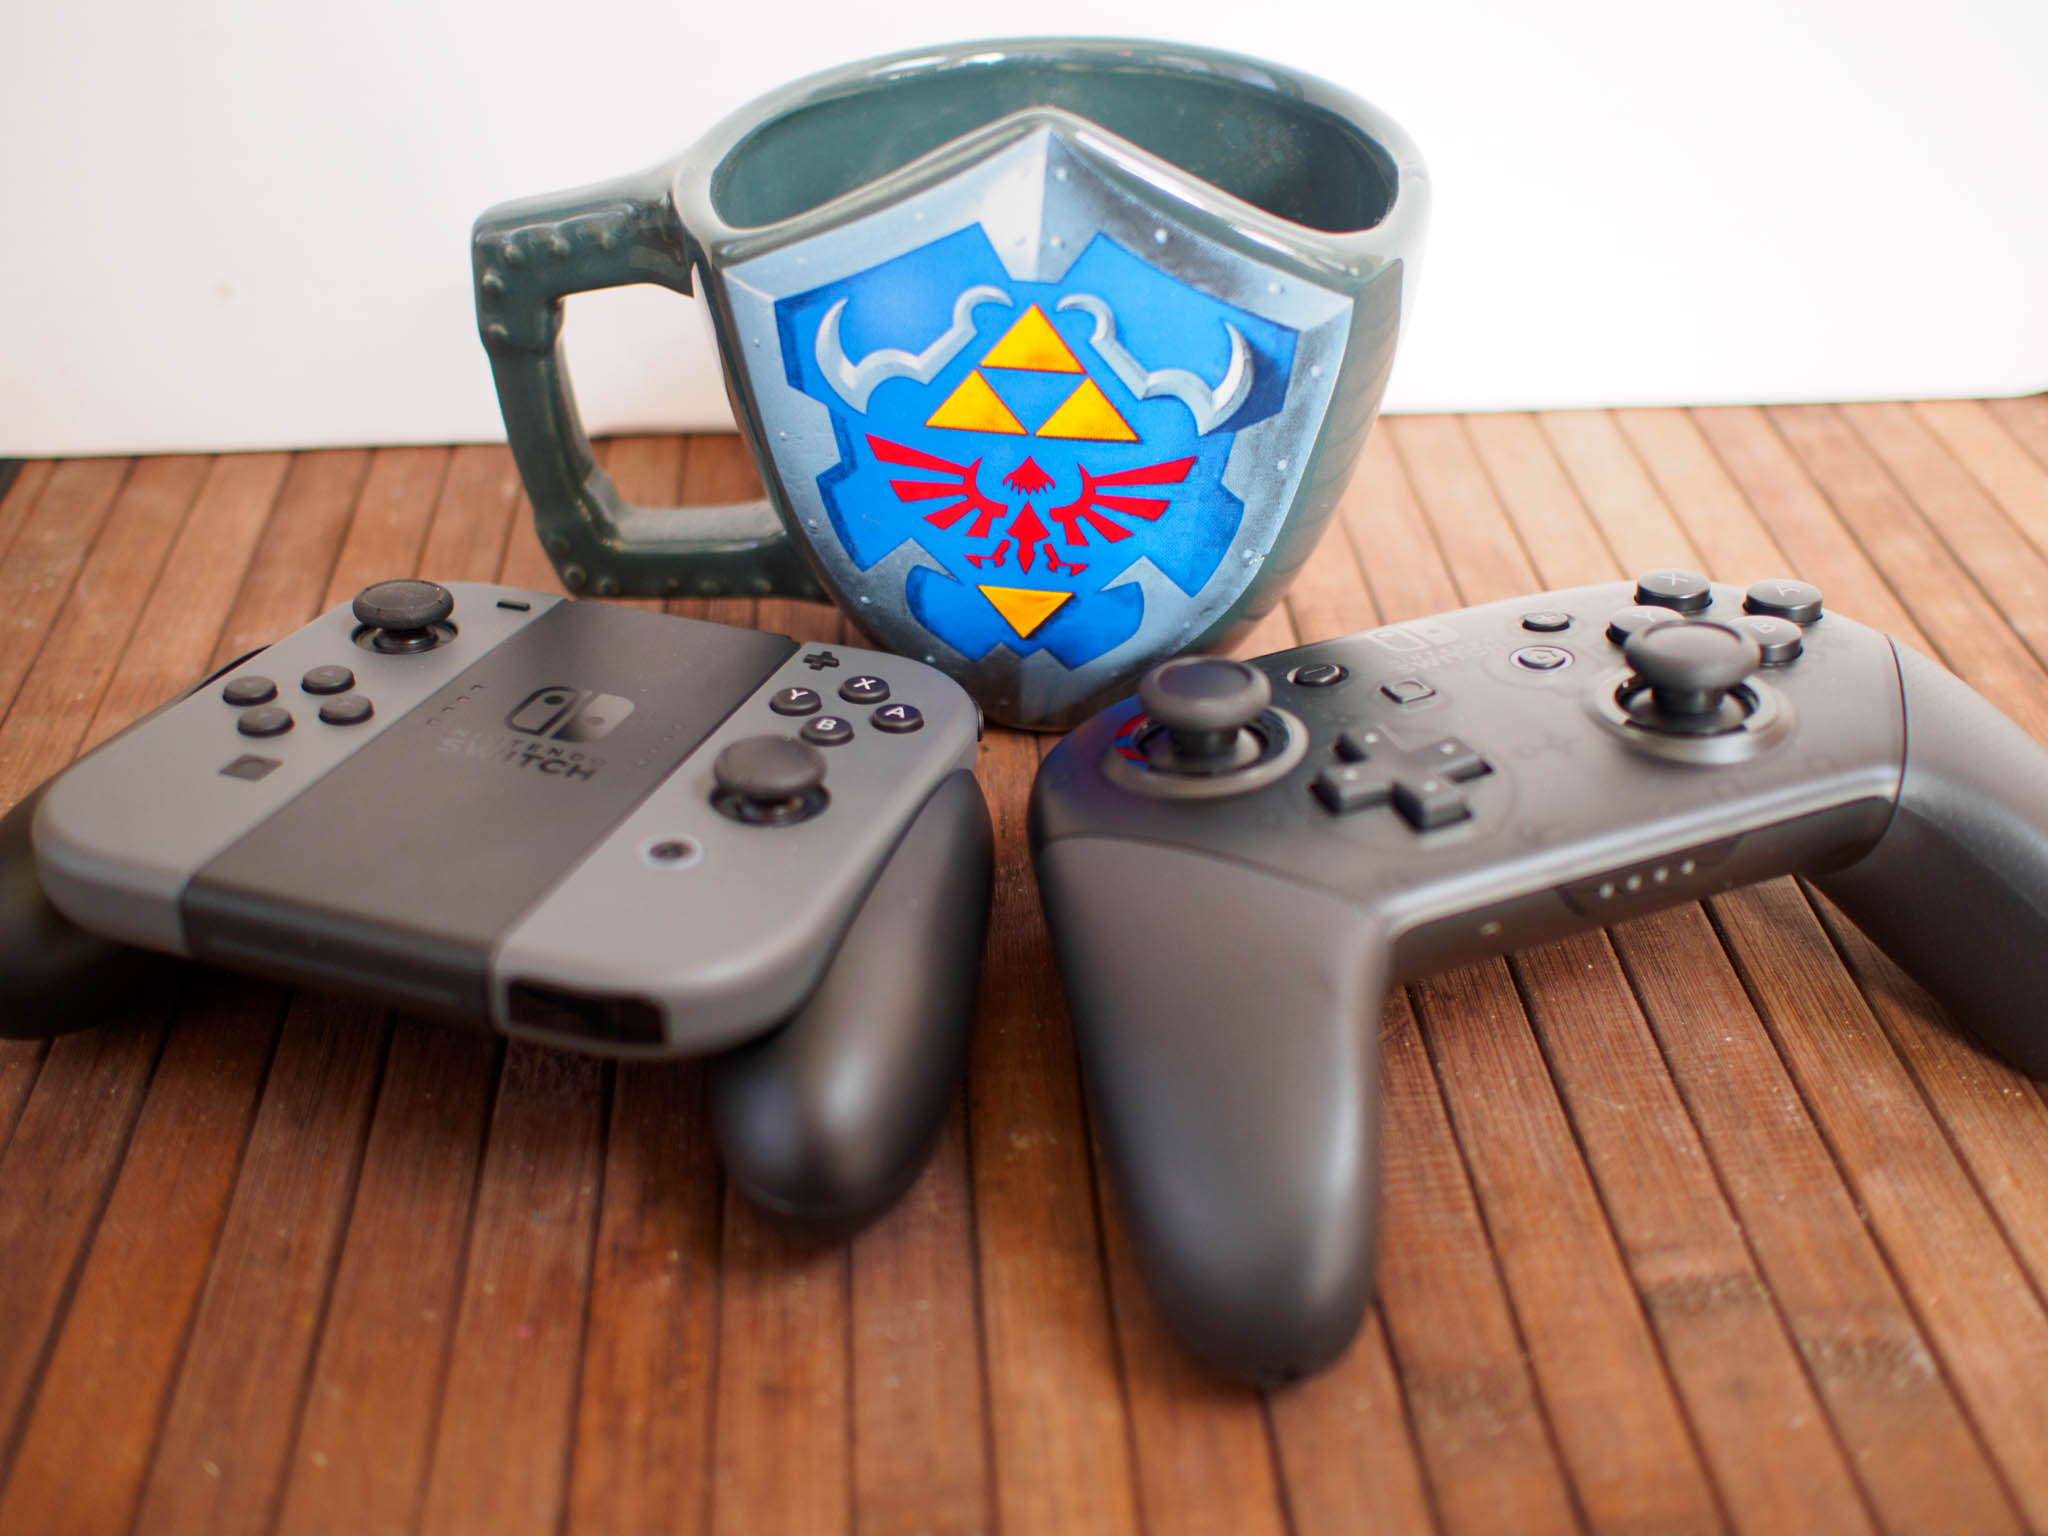 Joy-Con next to a Pro Controller with a Zelda mug between them